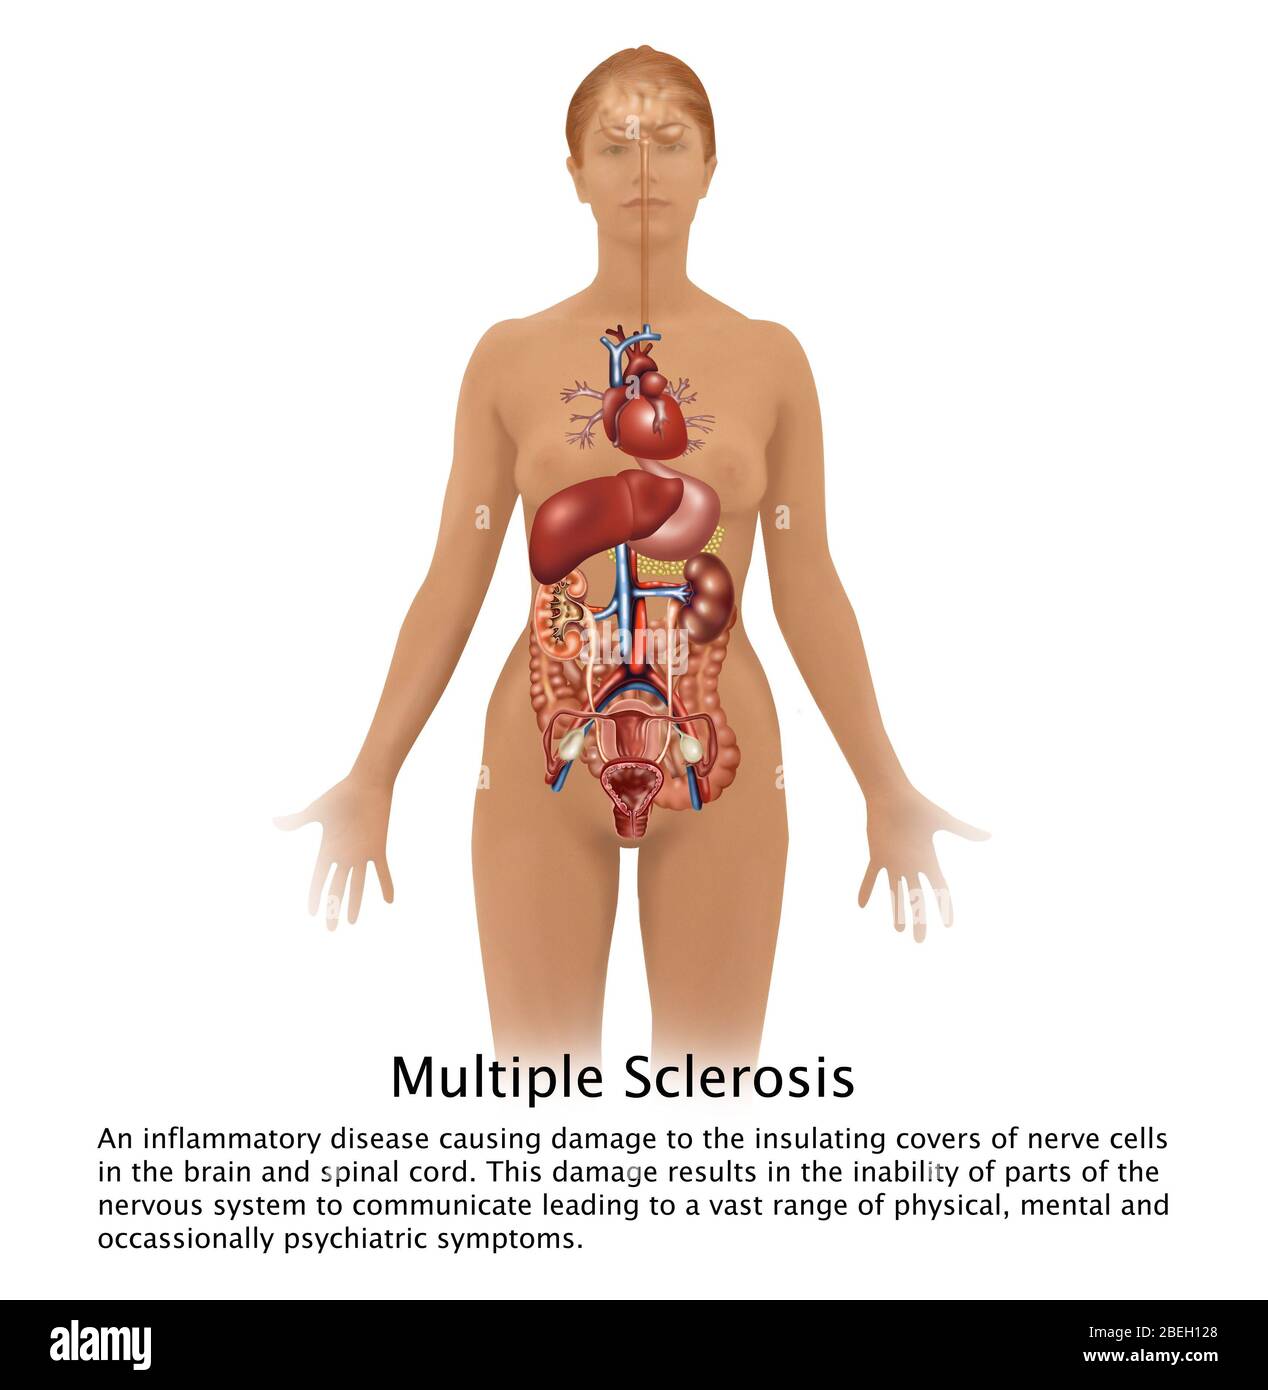 Multiple Sclerosis and Human Body Stock Photo